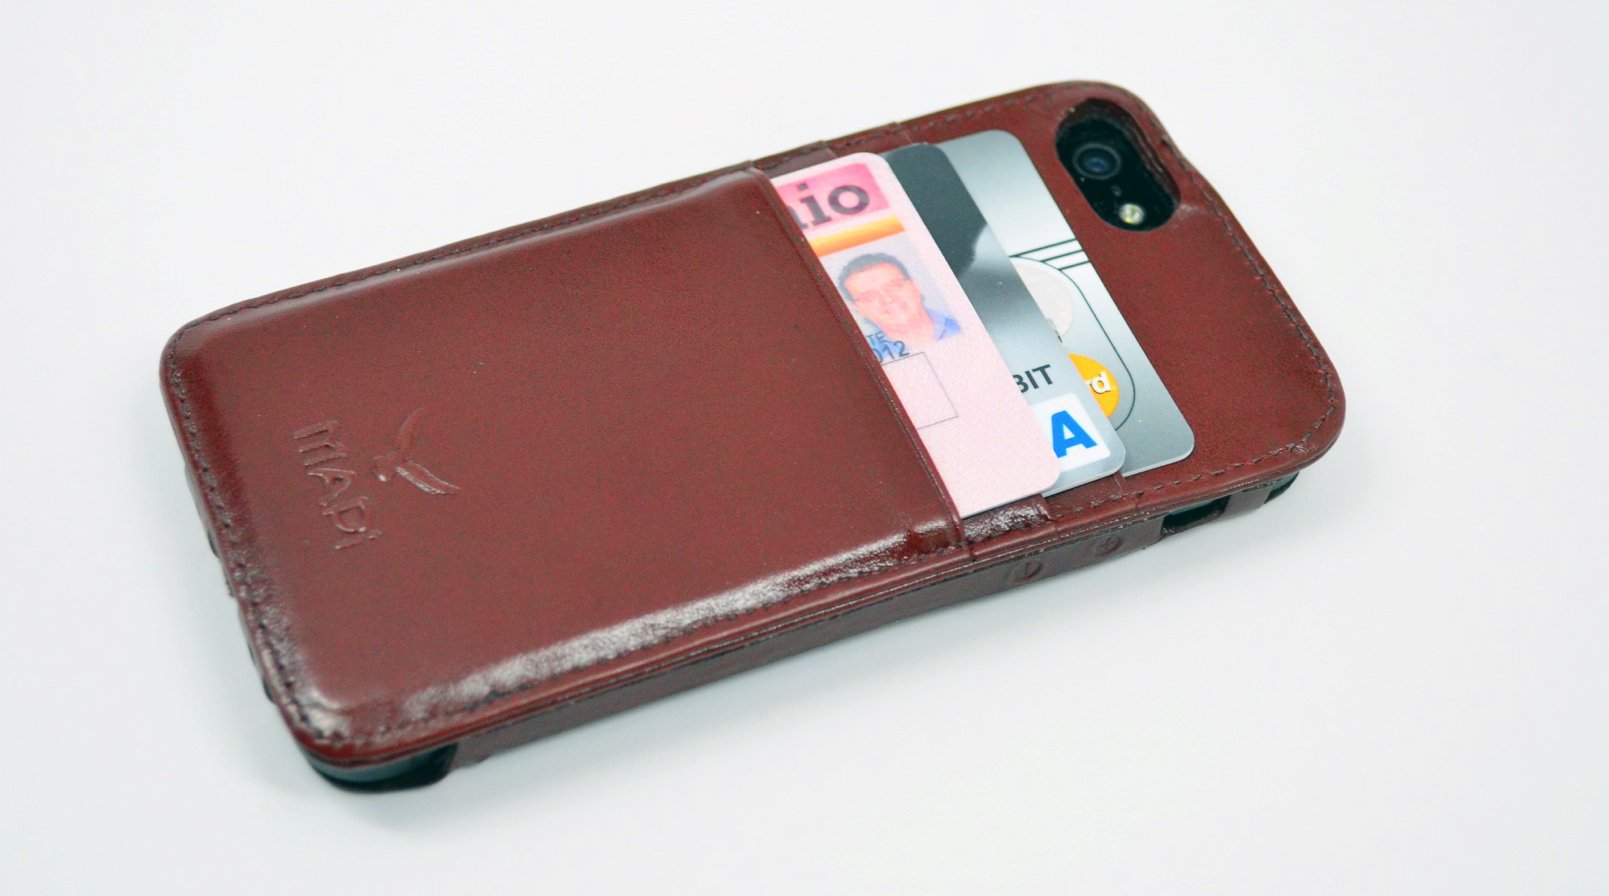 Tion iPhone 5 Leather Wallet Case Review